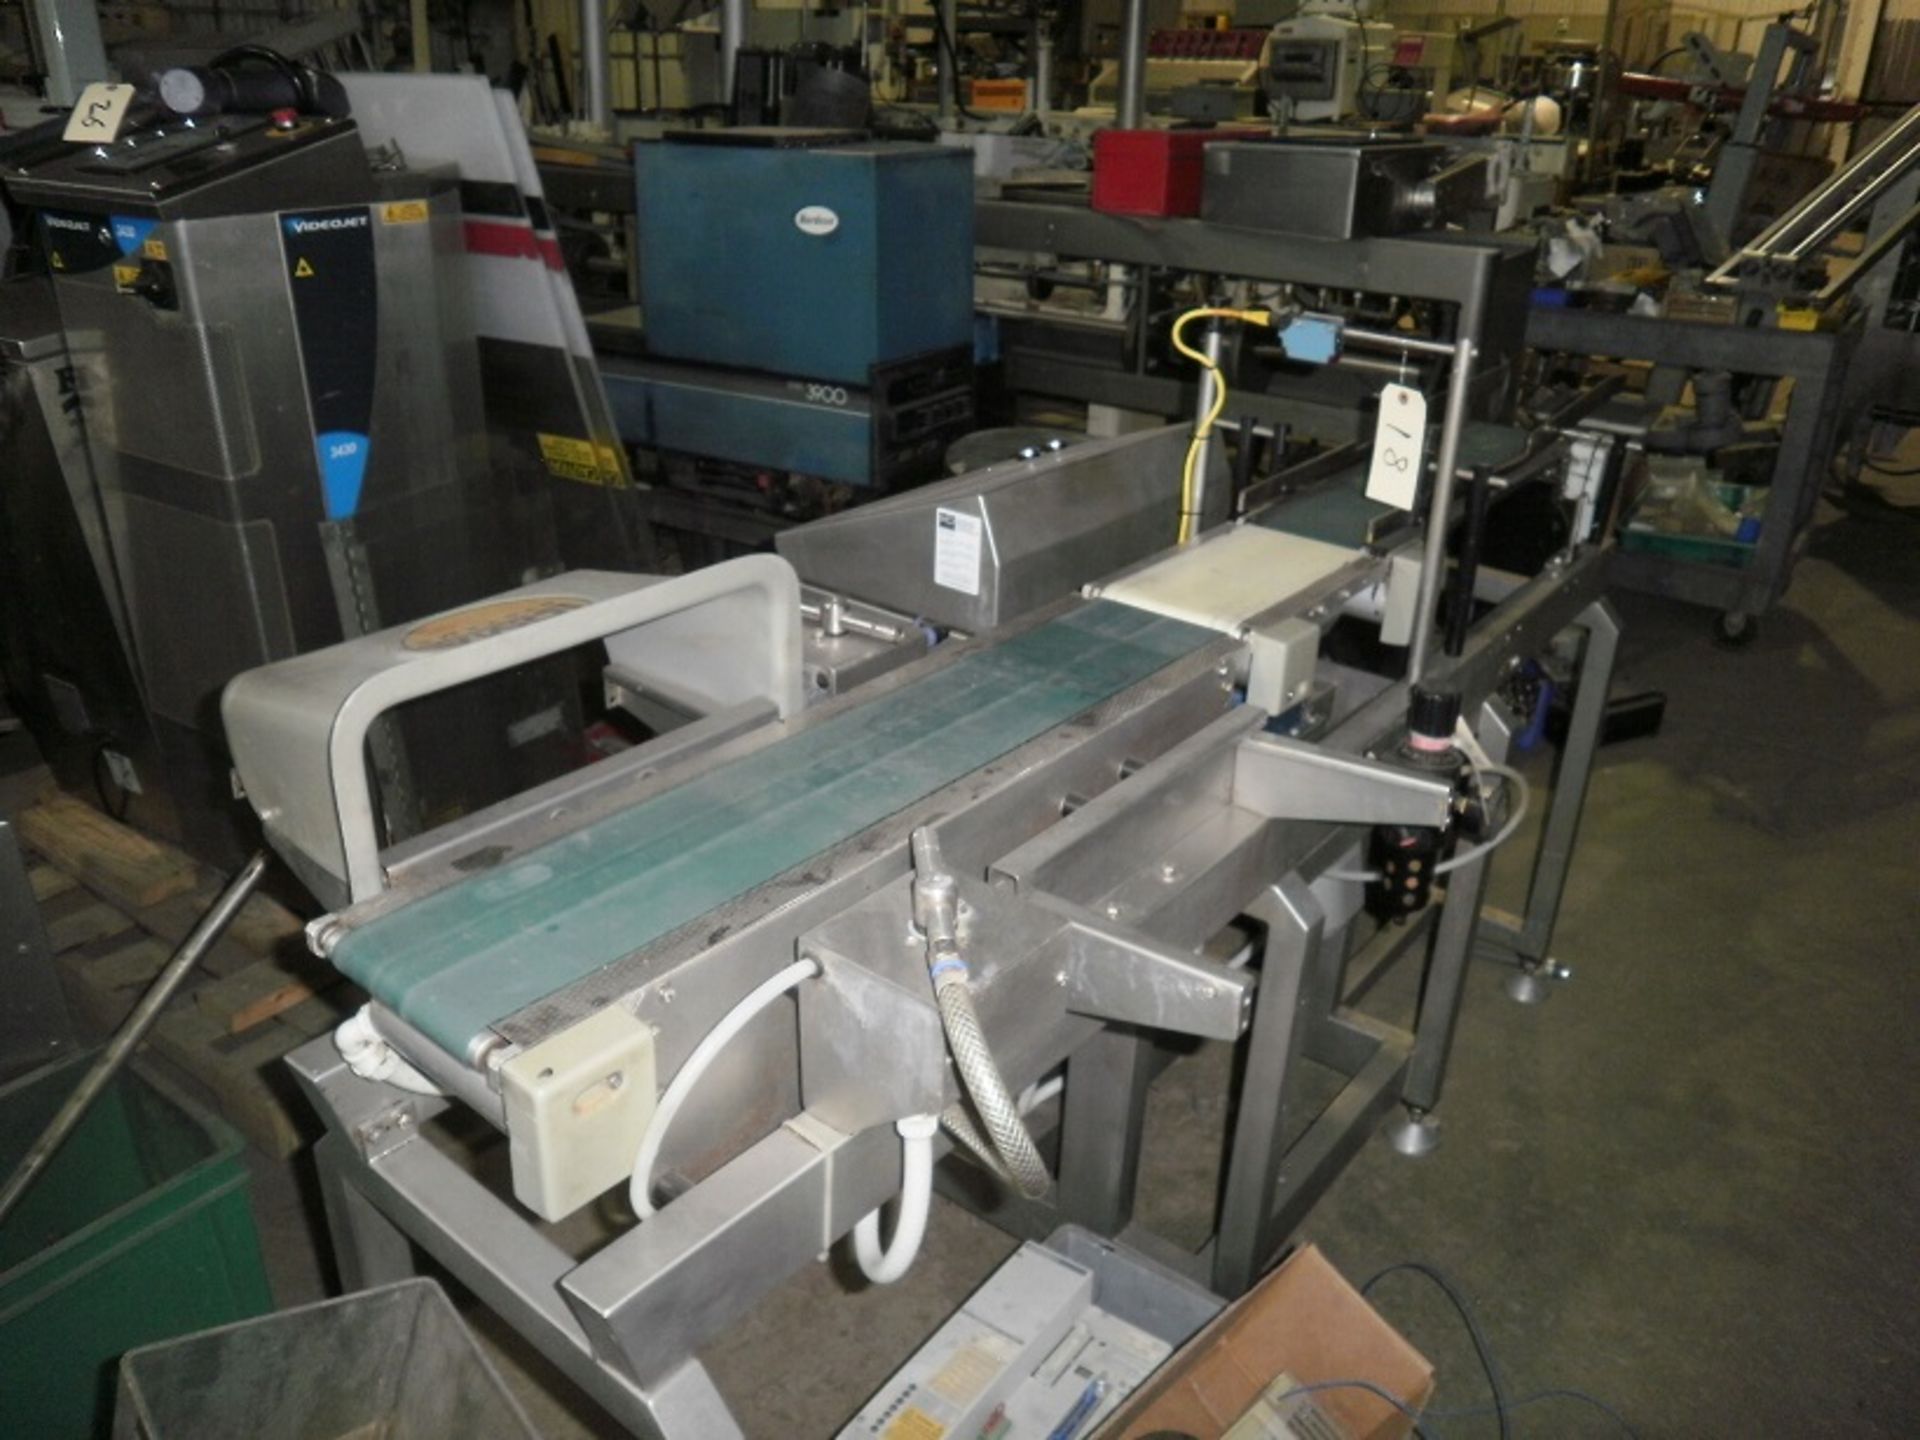 Loma 7000 Check-weigher, 3 belt unit, infeed conveyor 28" long, weigh area 12" long, exit conveyor 3